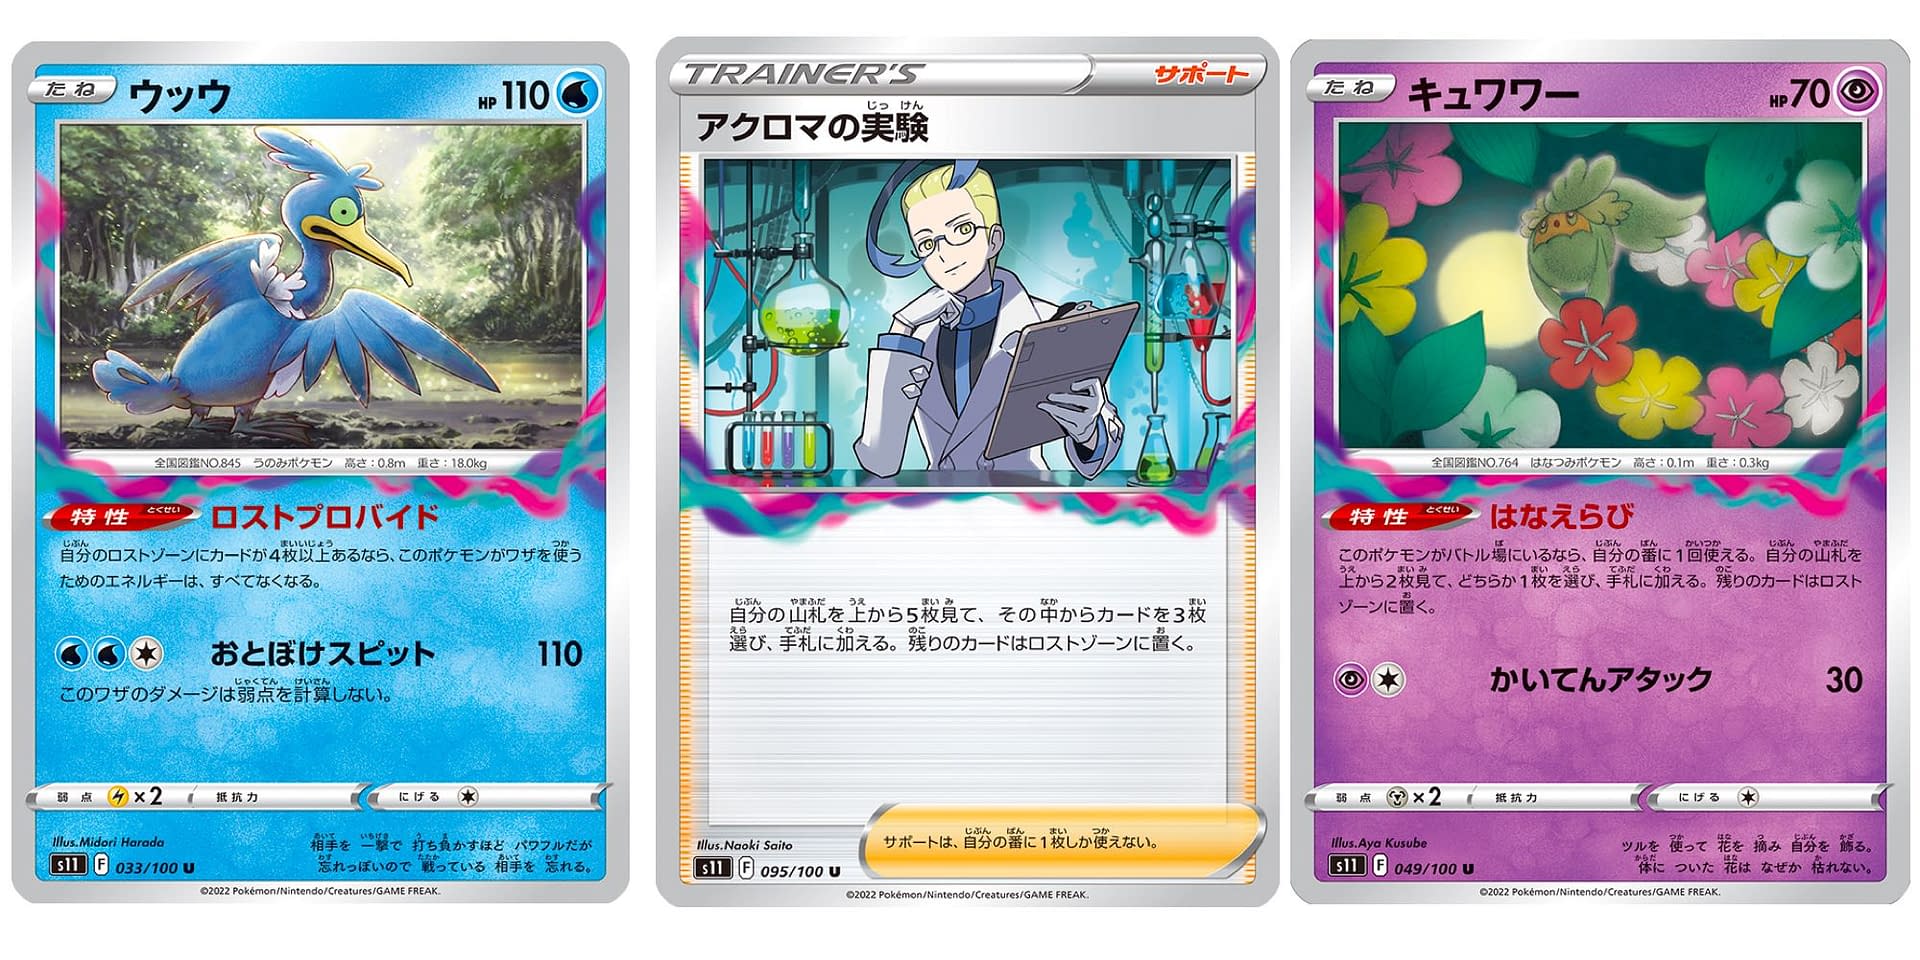 Say goodbye to the yellow borders of Pokémon trading cards